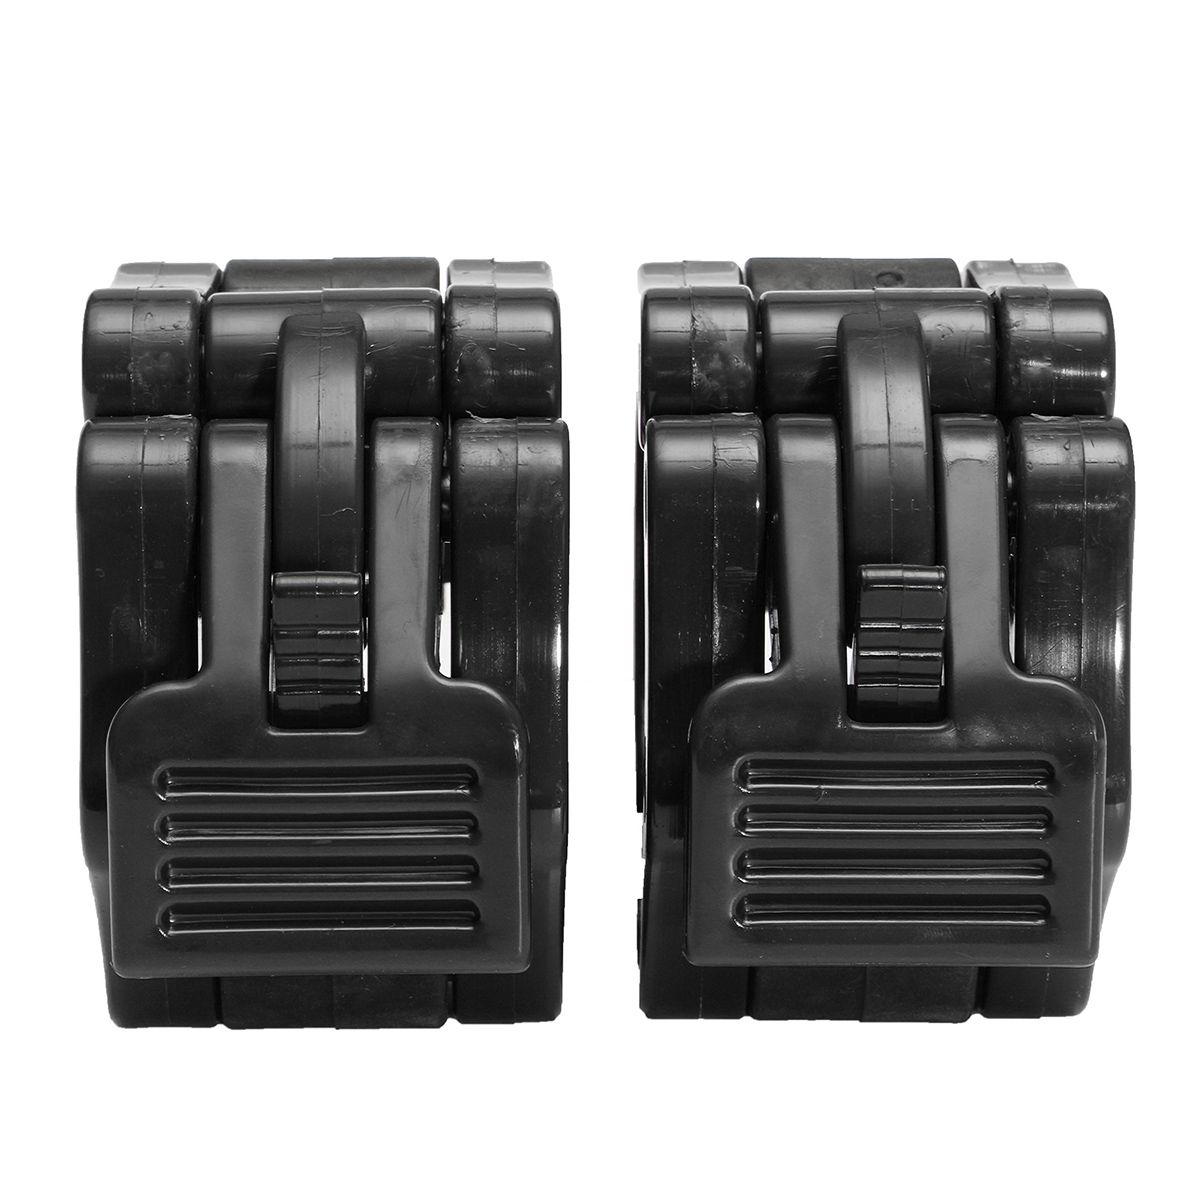 2Pcs-Nylon-Dumbbell-Barbell-Bar-Spinlock-Collars-Clips-Weight-Clamps-Training-1263716